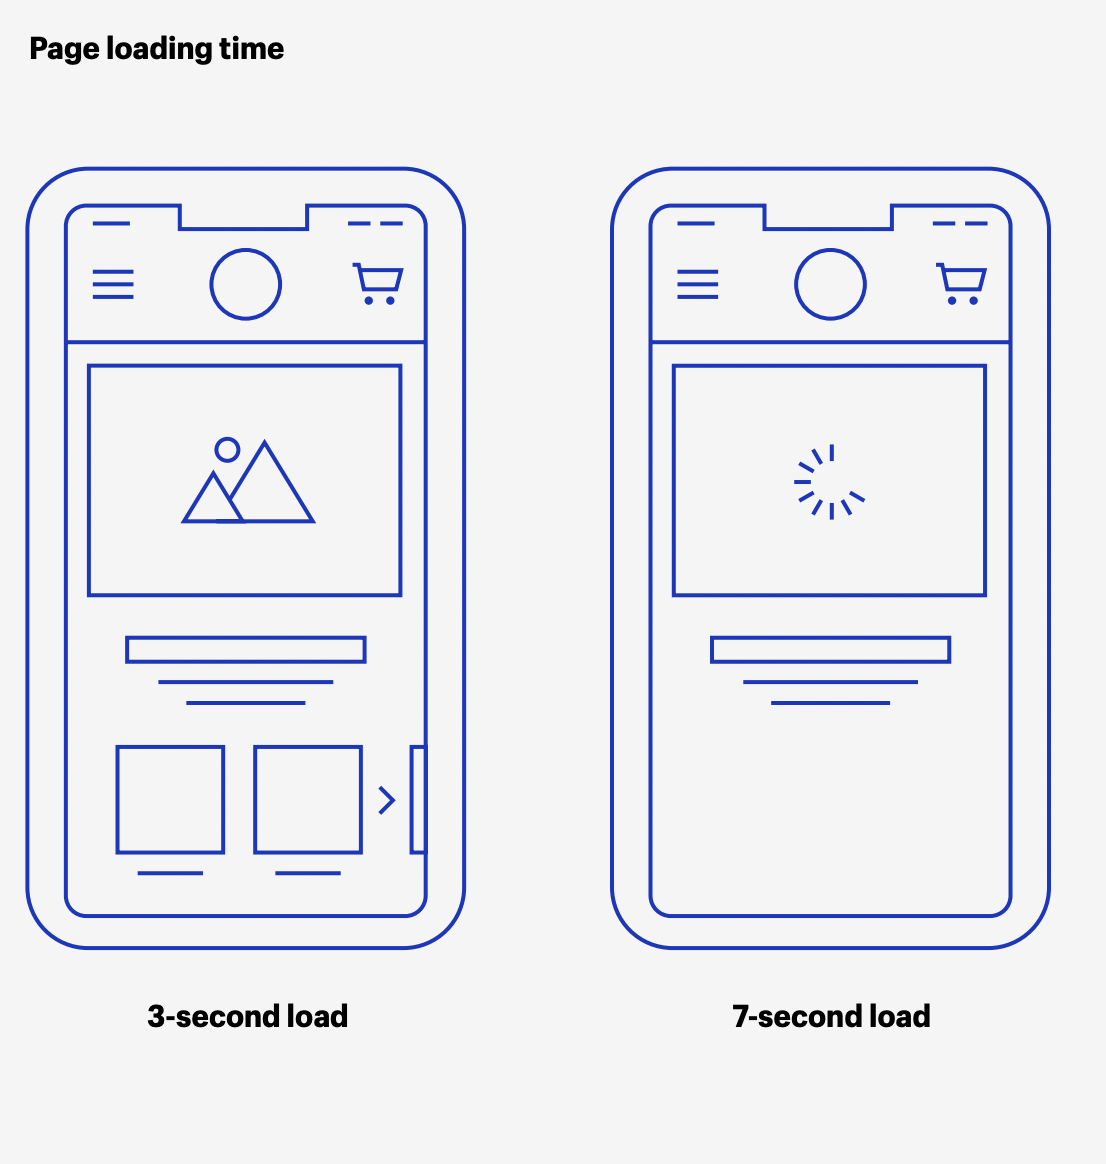 Page loading time graphic showing a 3-second load compared to a 7-second load.